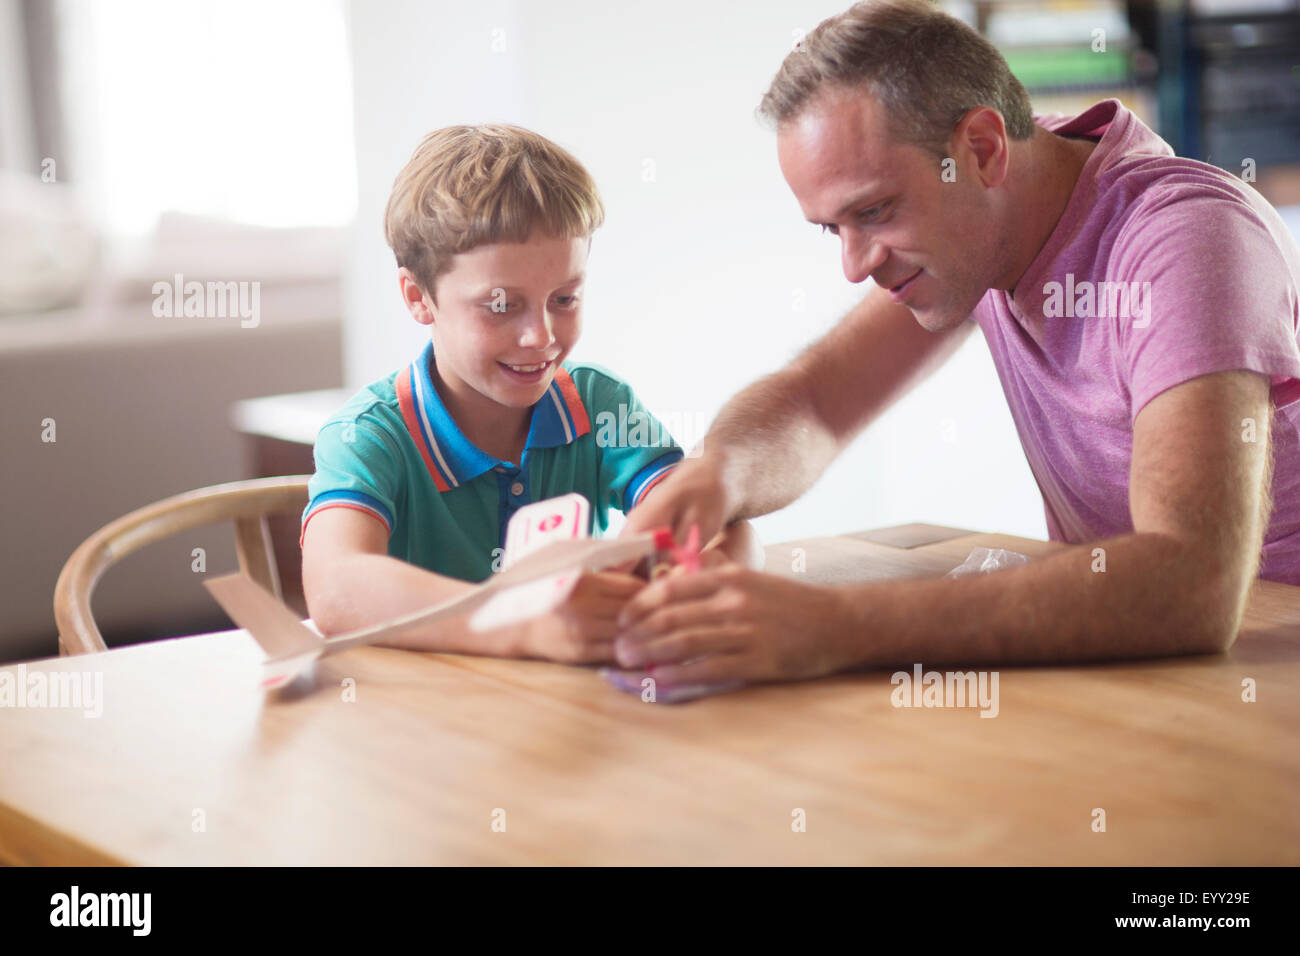 Caucasian father and son examining model airplane at table Stock Photo